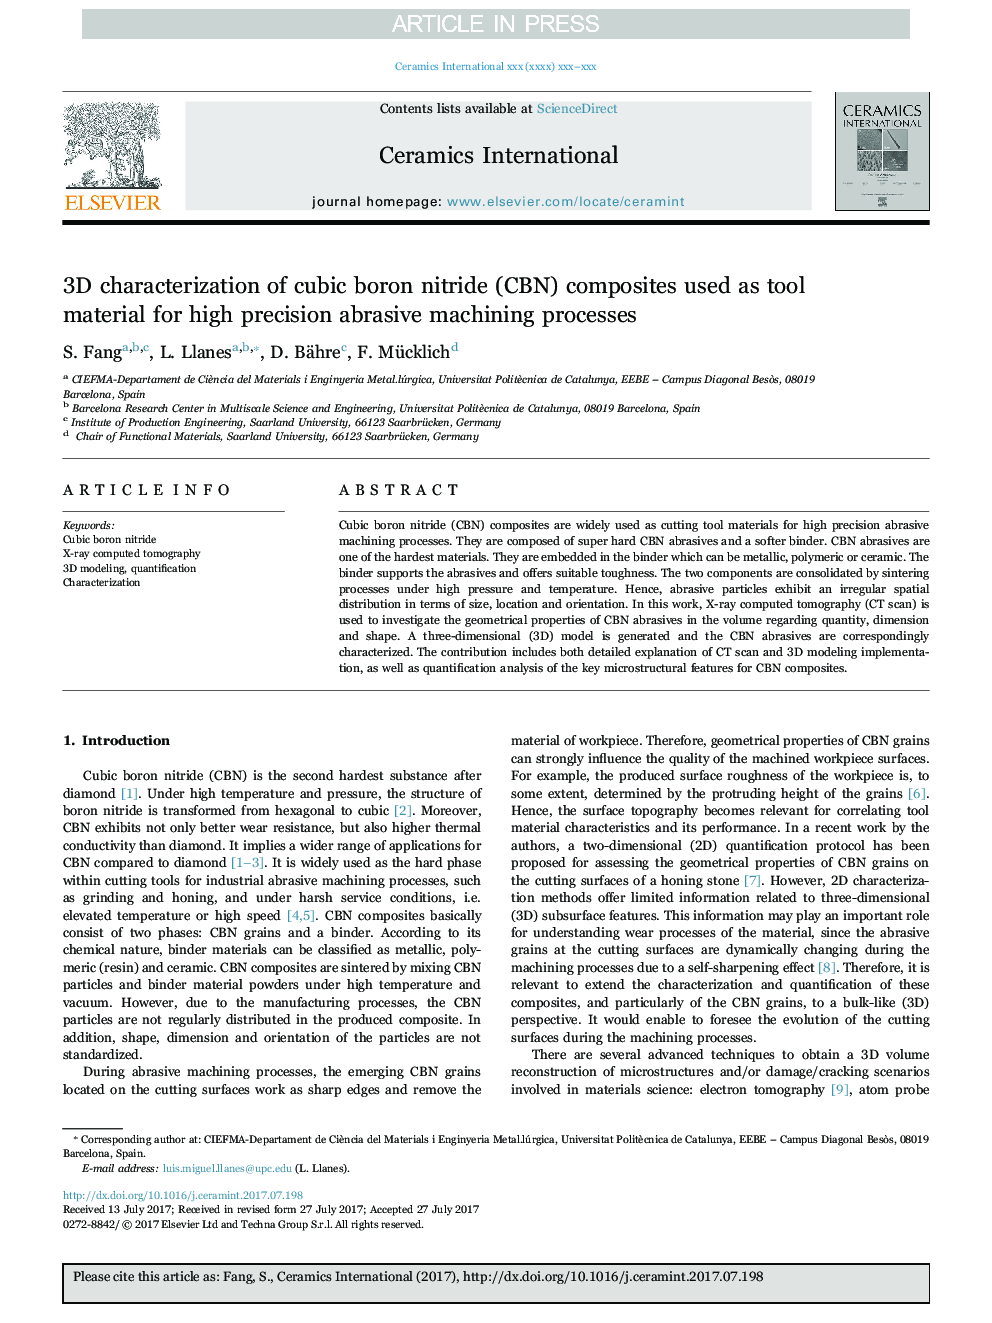 3D characterization of cubic boron nitride (CBN) composites used as tool material for high precision abrasive machining processes